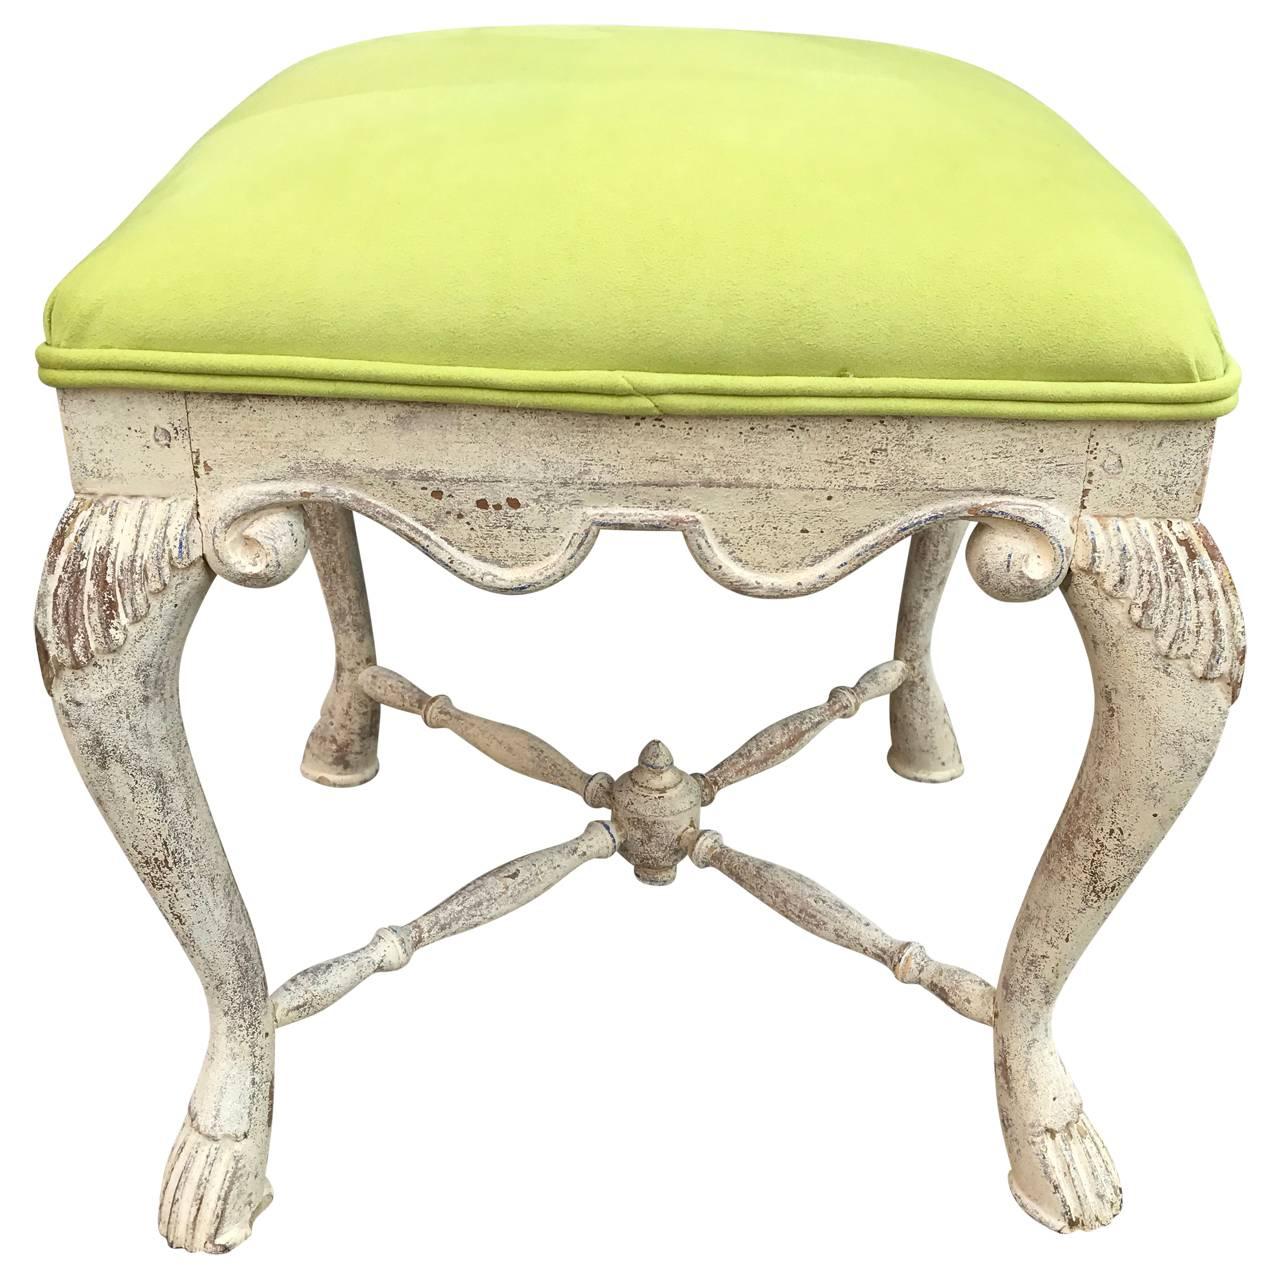 Swedish foot stool, with traces of multiple colors after being scraped down. Stool is newly upholstered in a bright lemon green faux suede fabric 
 